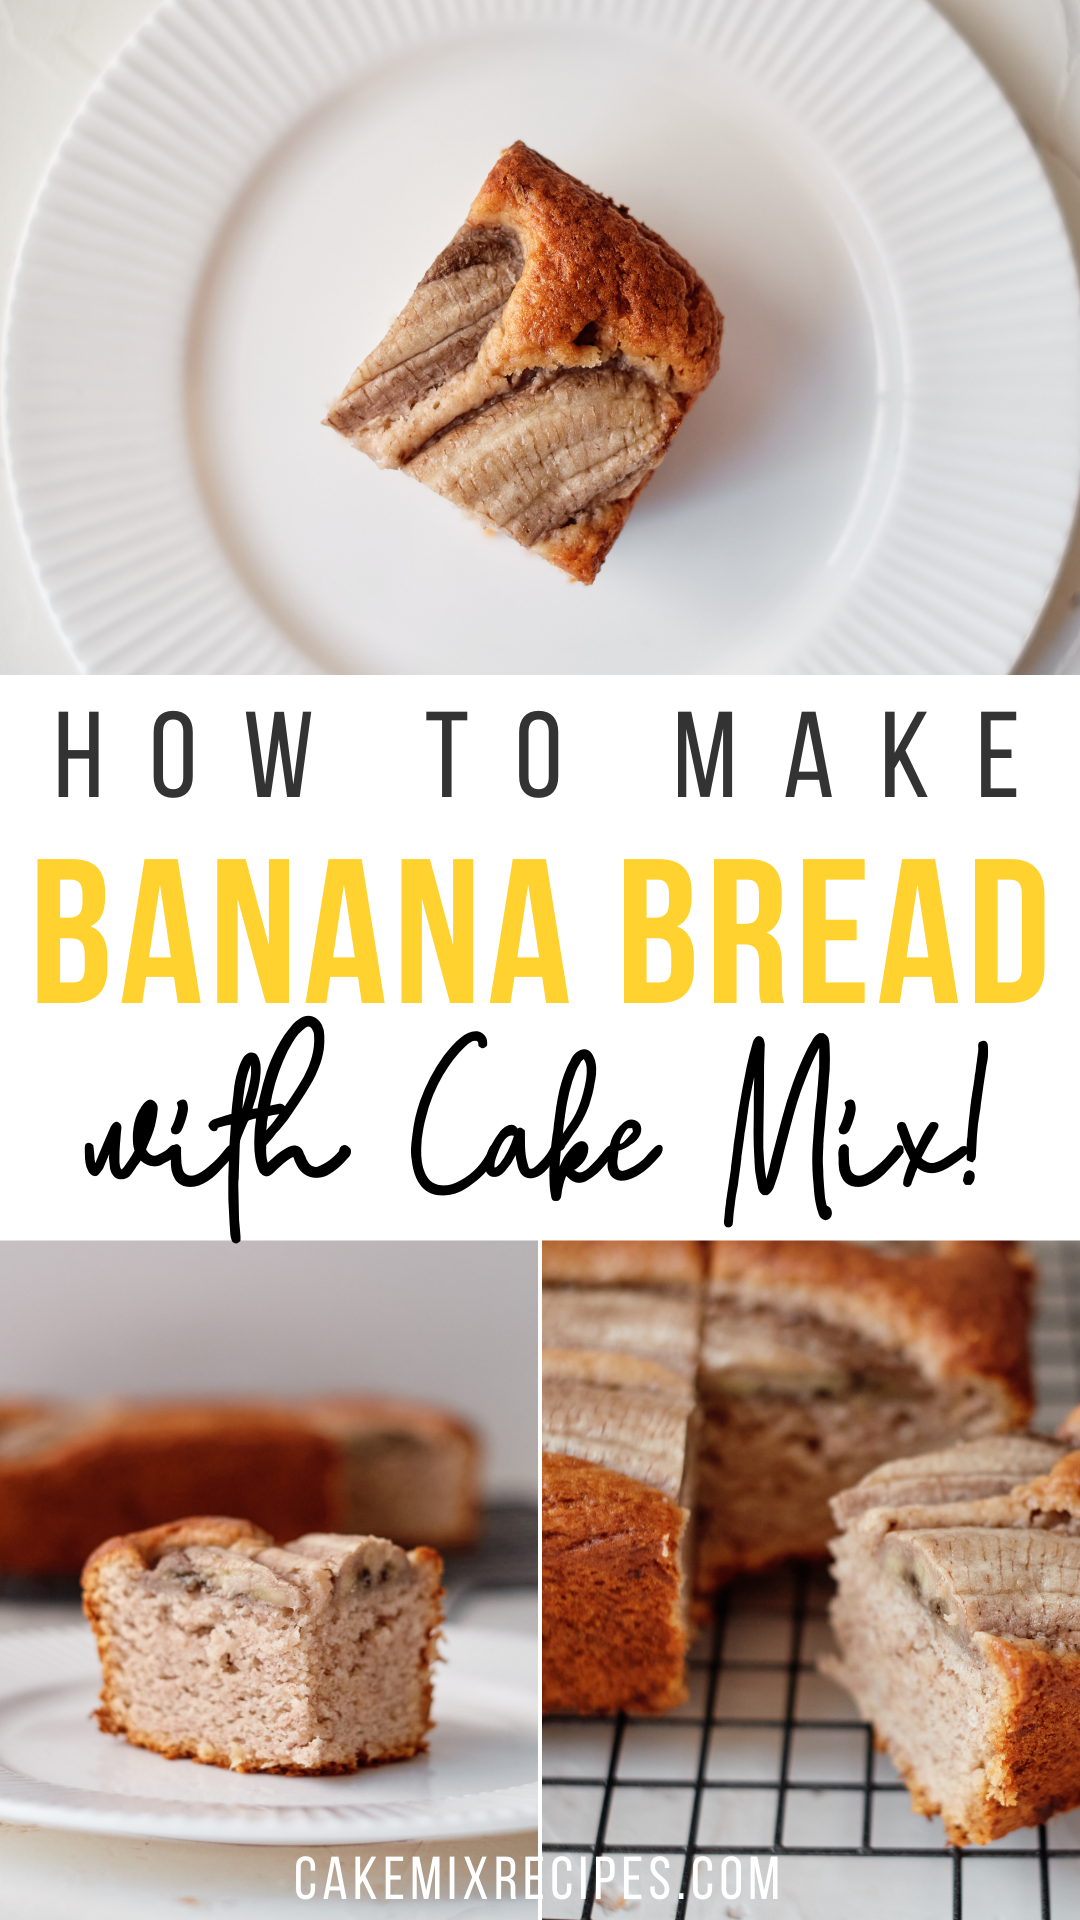 This pin shows the finished images of the banana bread with cake mix and the title is in the middle. 